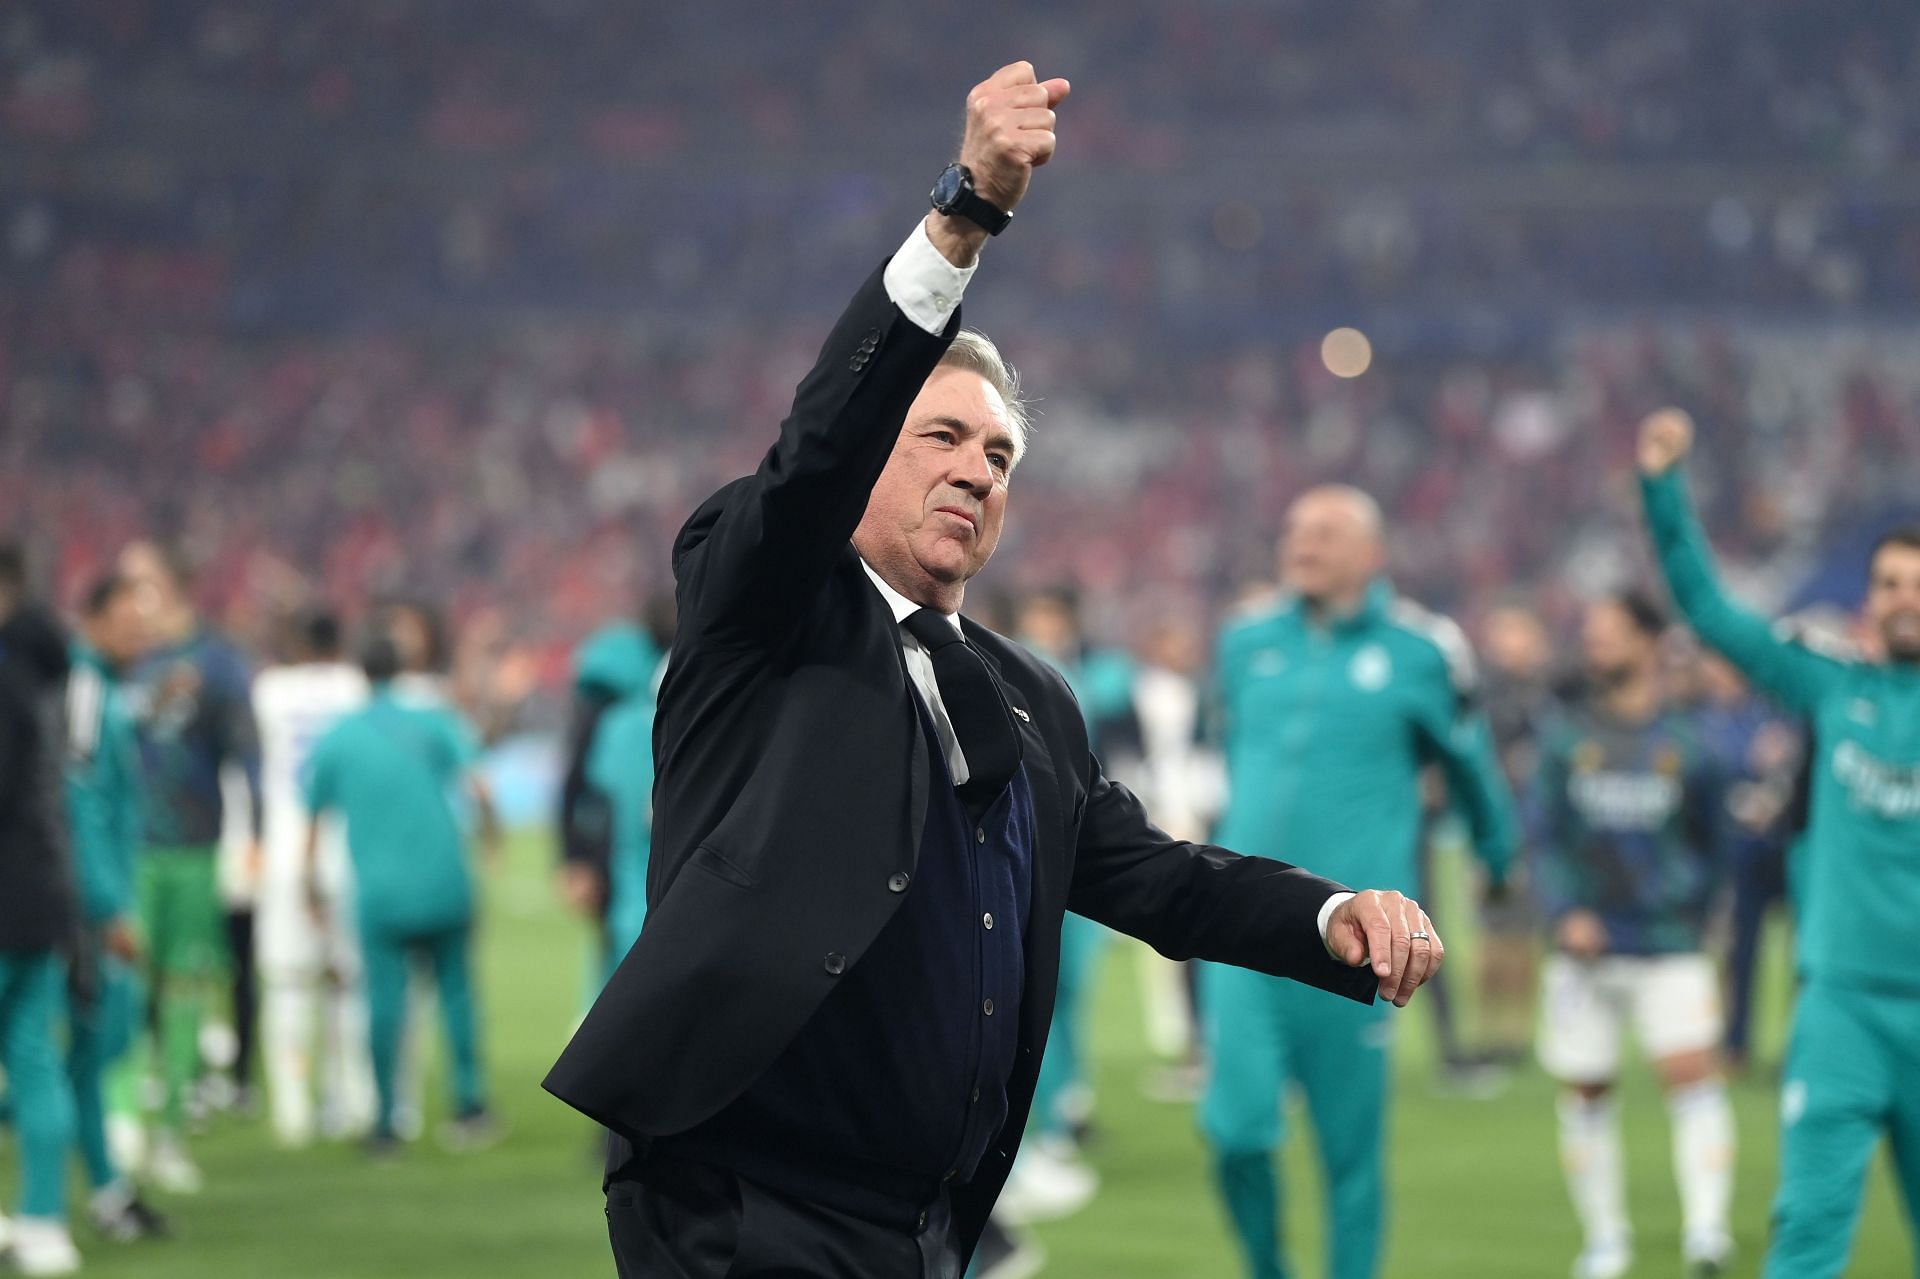 Carlo Ancelotti cemented his status as one of the greatest managers to have graced the game